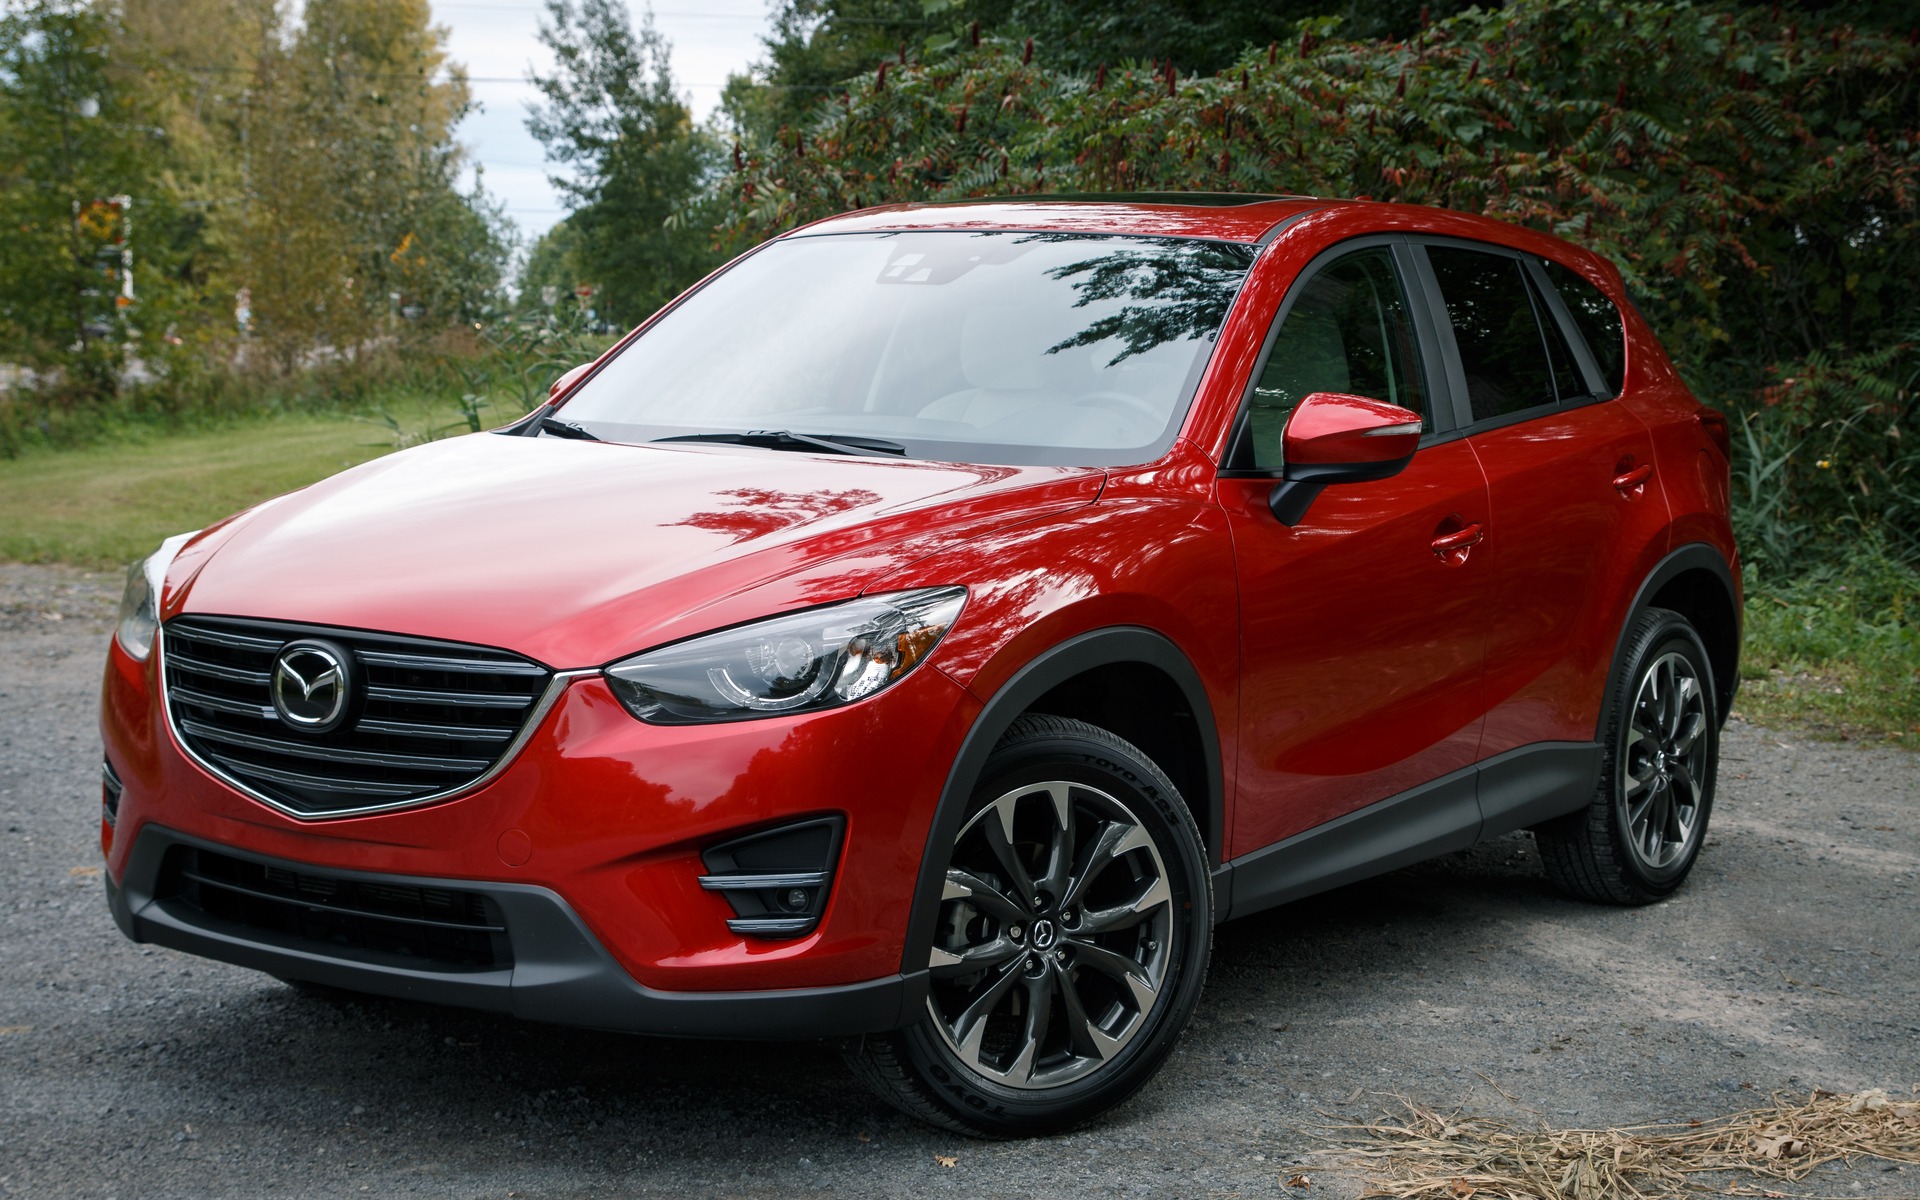 2016 Mazda CX-5: Hard to Beat - The Car Guide